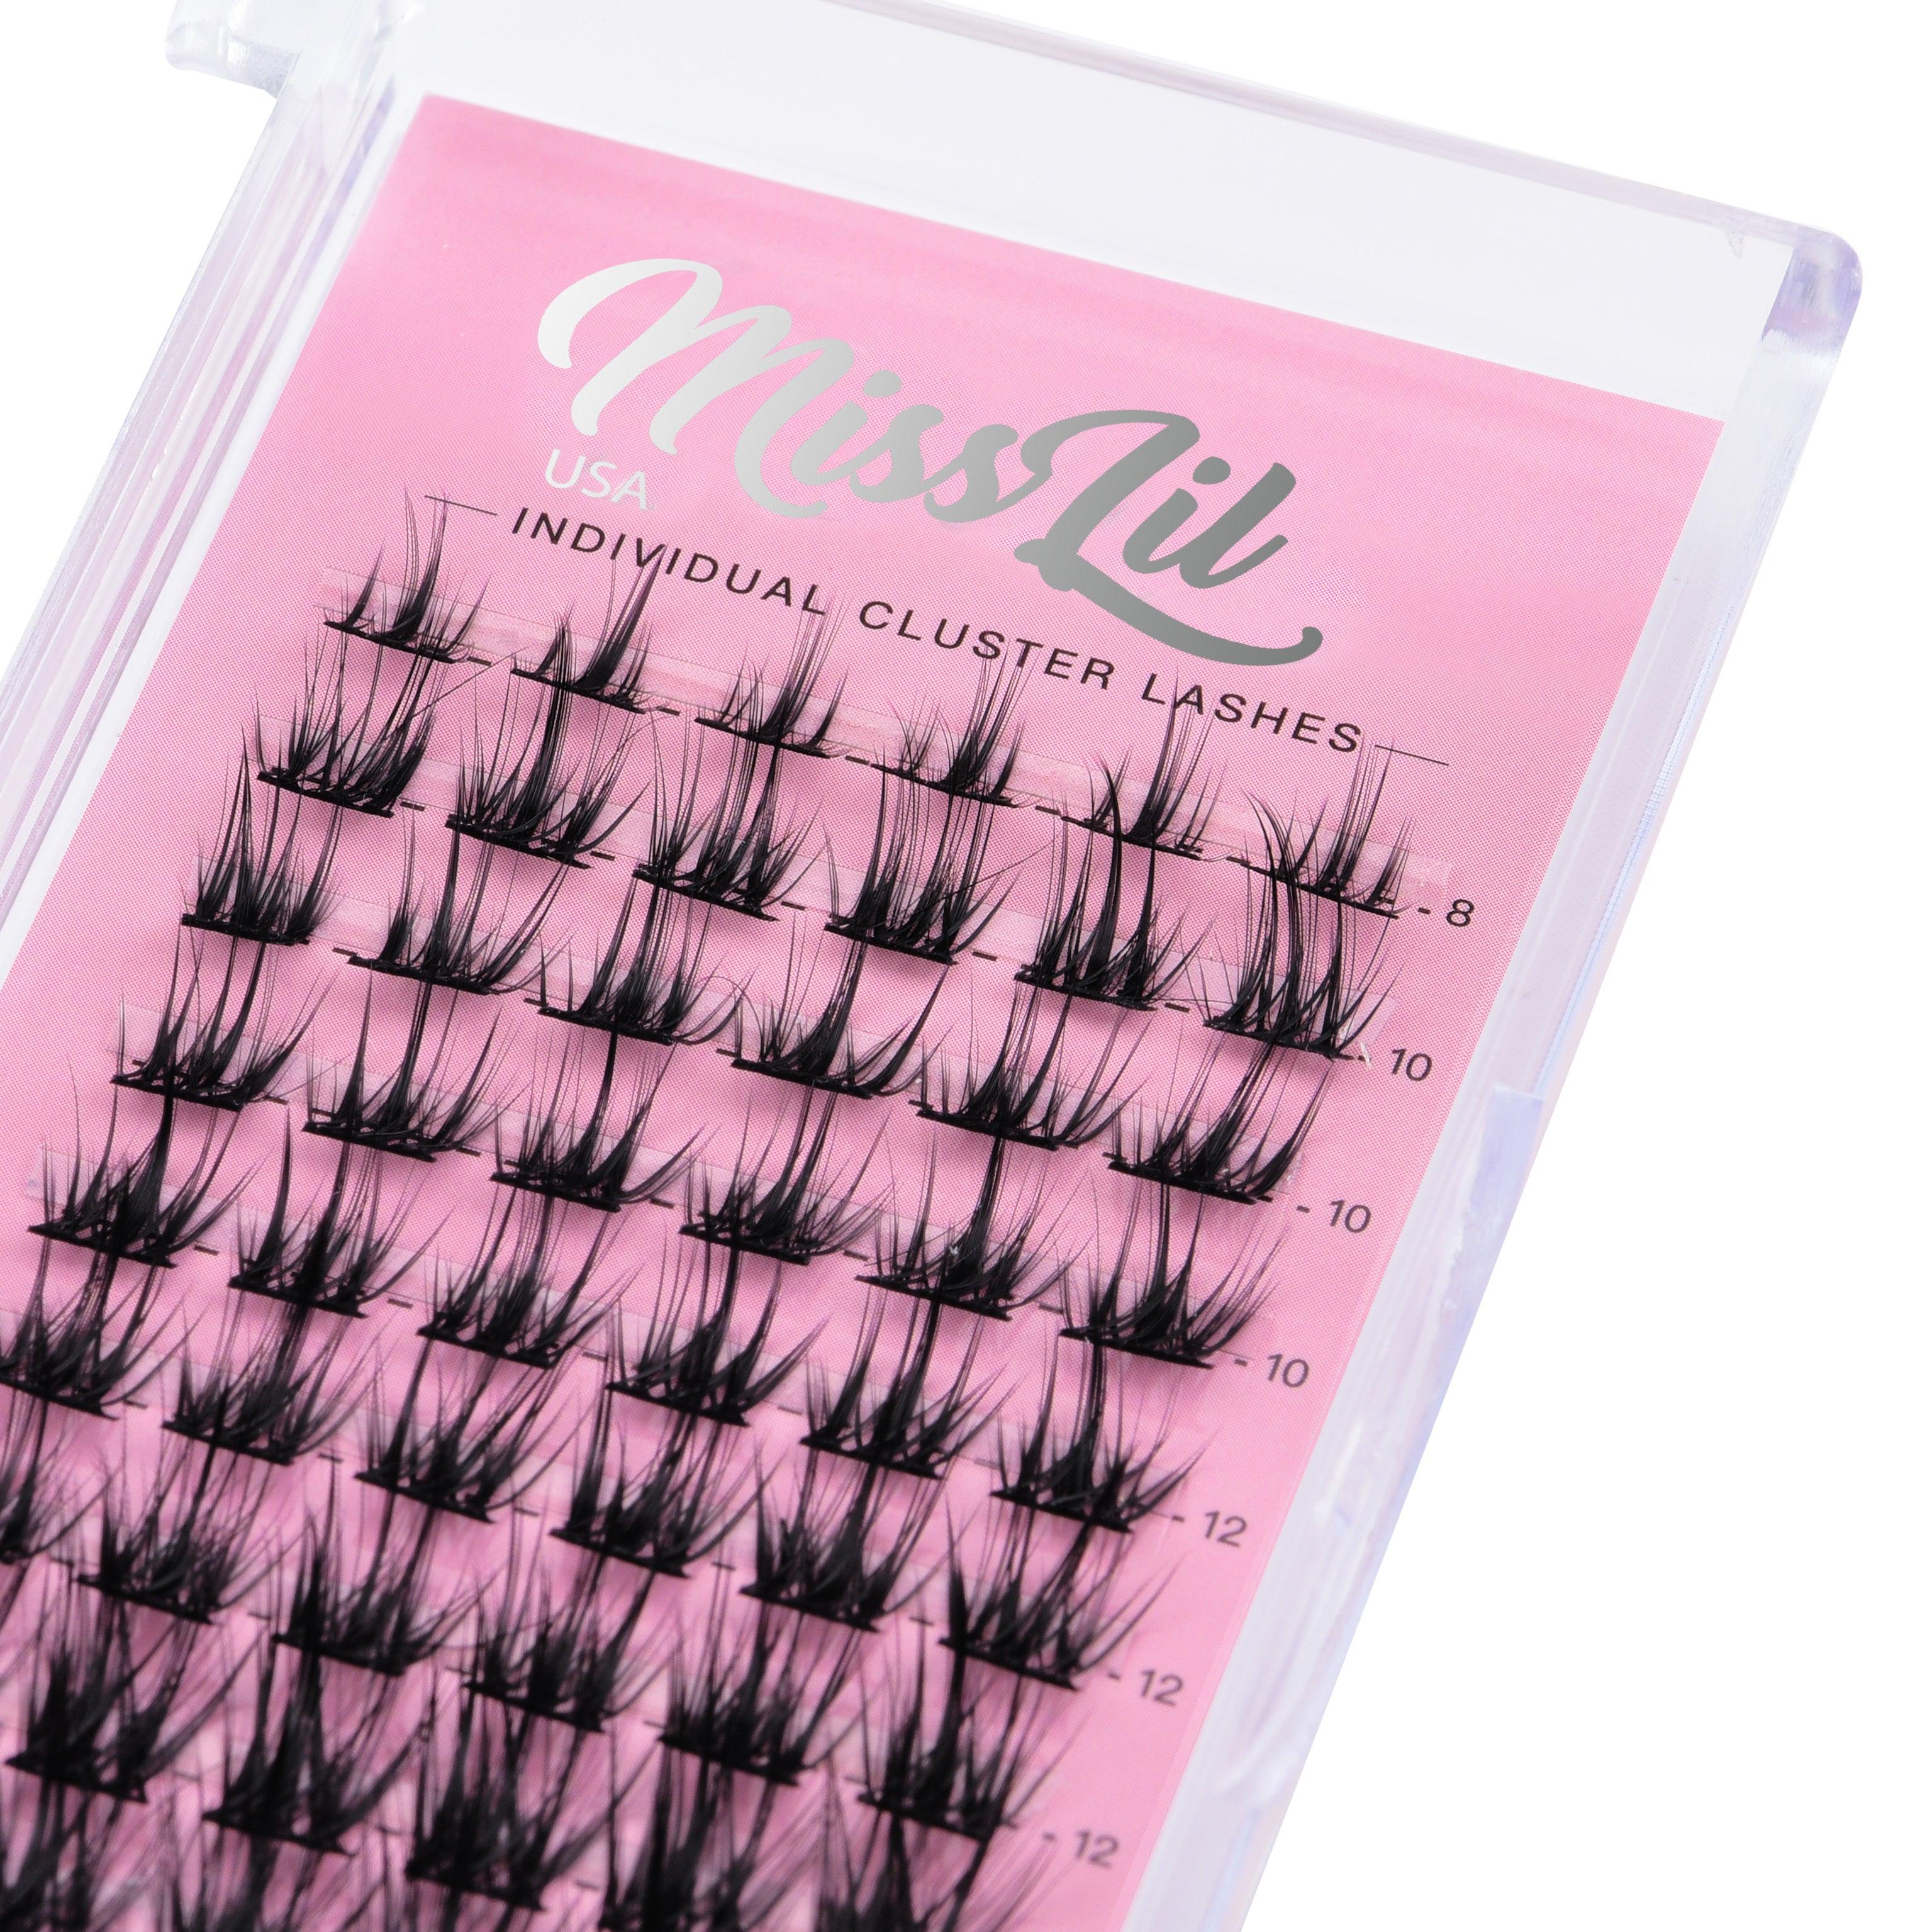 DIY Cluster Lashes AD-17 MIX small - Miss Lil USA